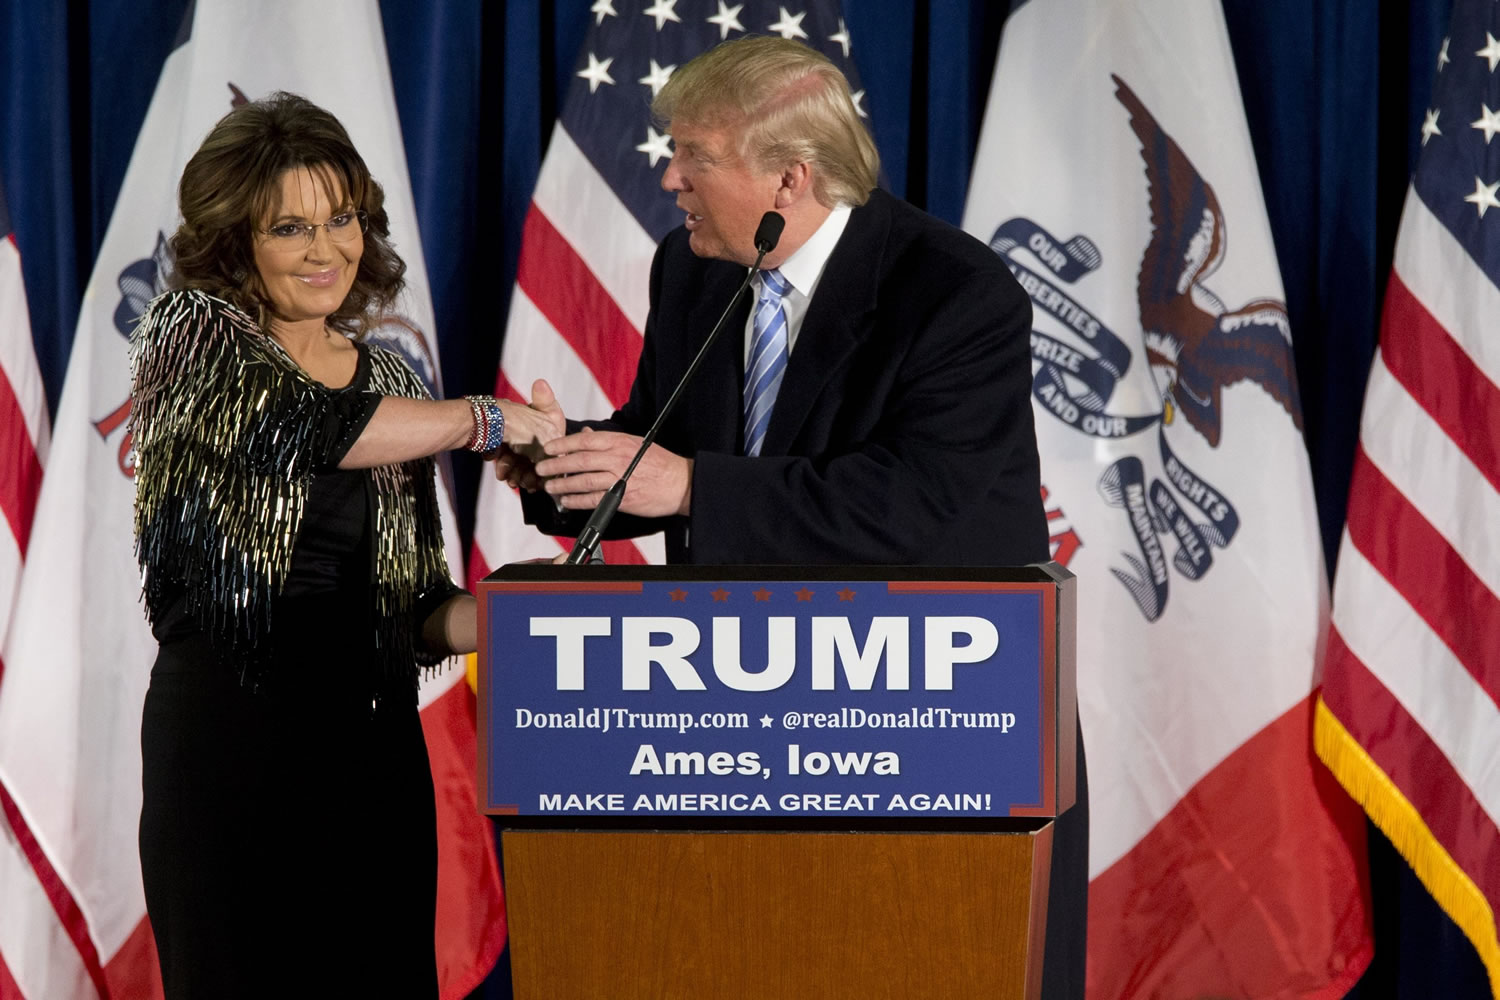 Former Alaska Gov. Sarah Palin endorsed Republican presidential candidate Donald Trump during a rally Tuesday at  Iowa State University in Ames, Iowa.